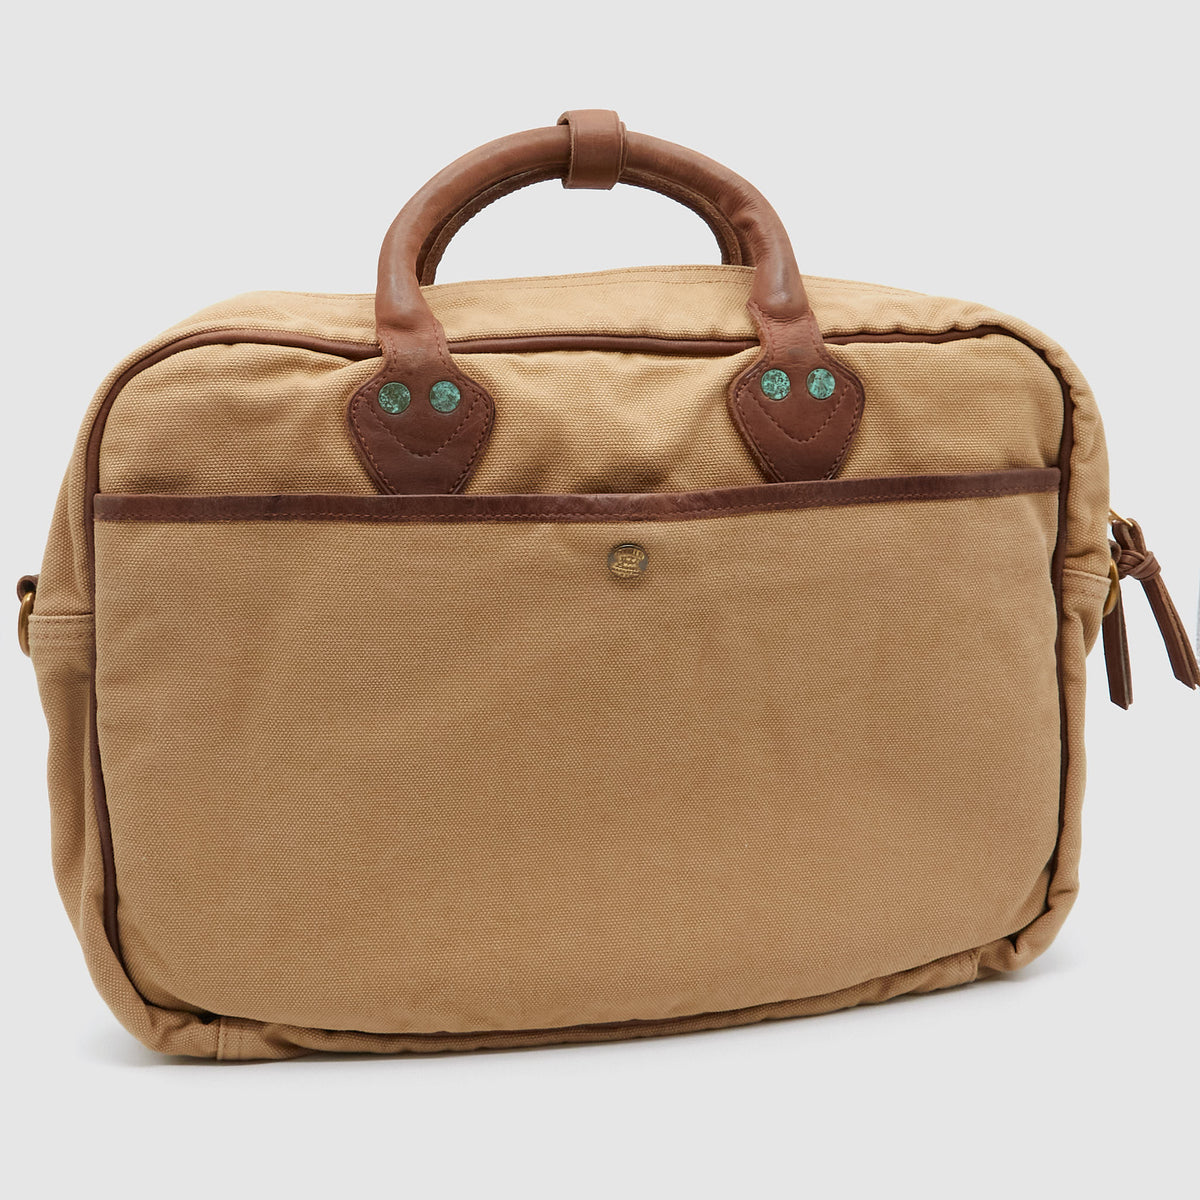 Double RL Canvas Briefcase with Leather-Trim